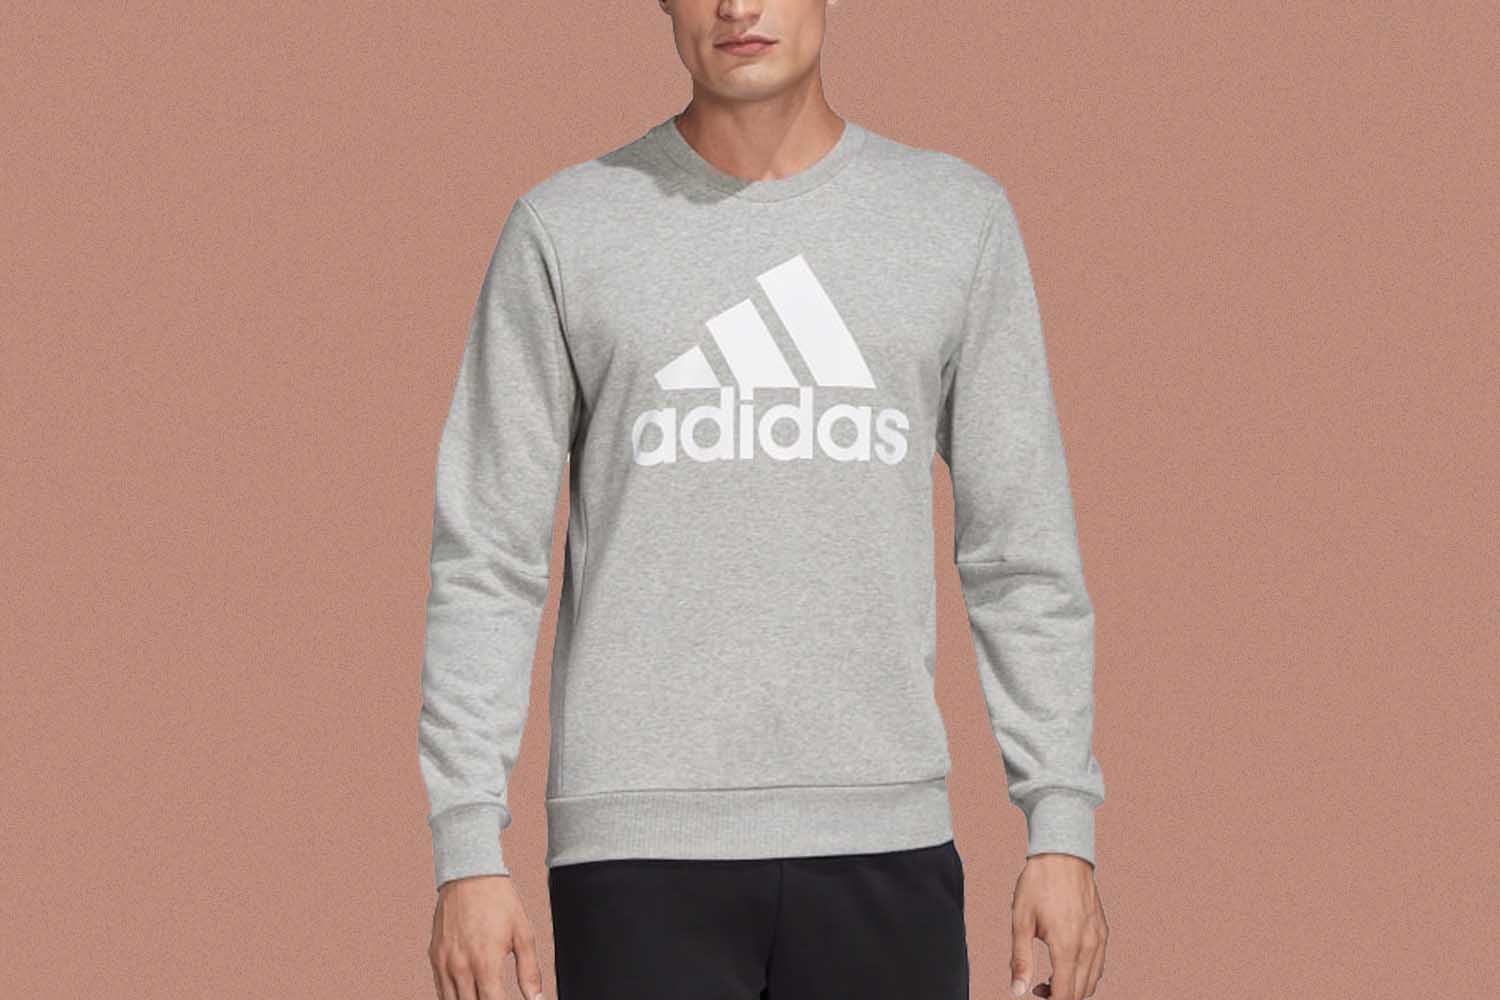 Deal: Adidas Hoodies, Sweats and Track Suits Are 25% Off